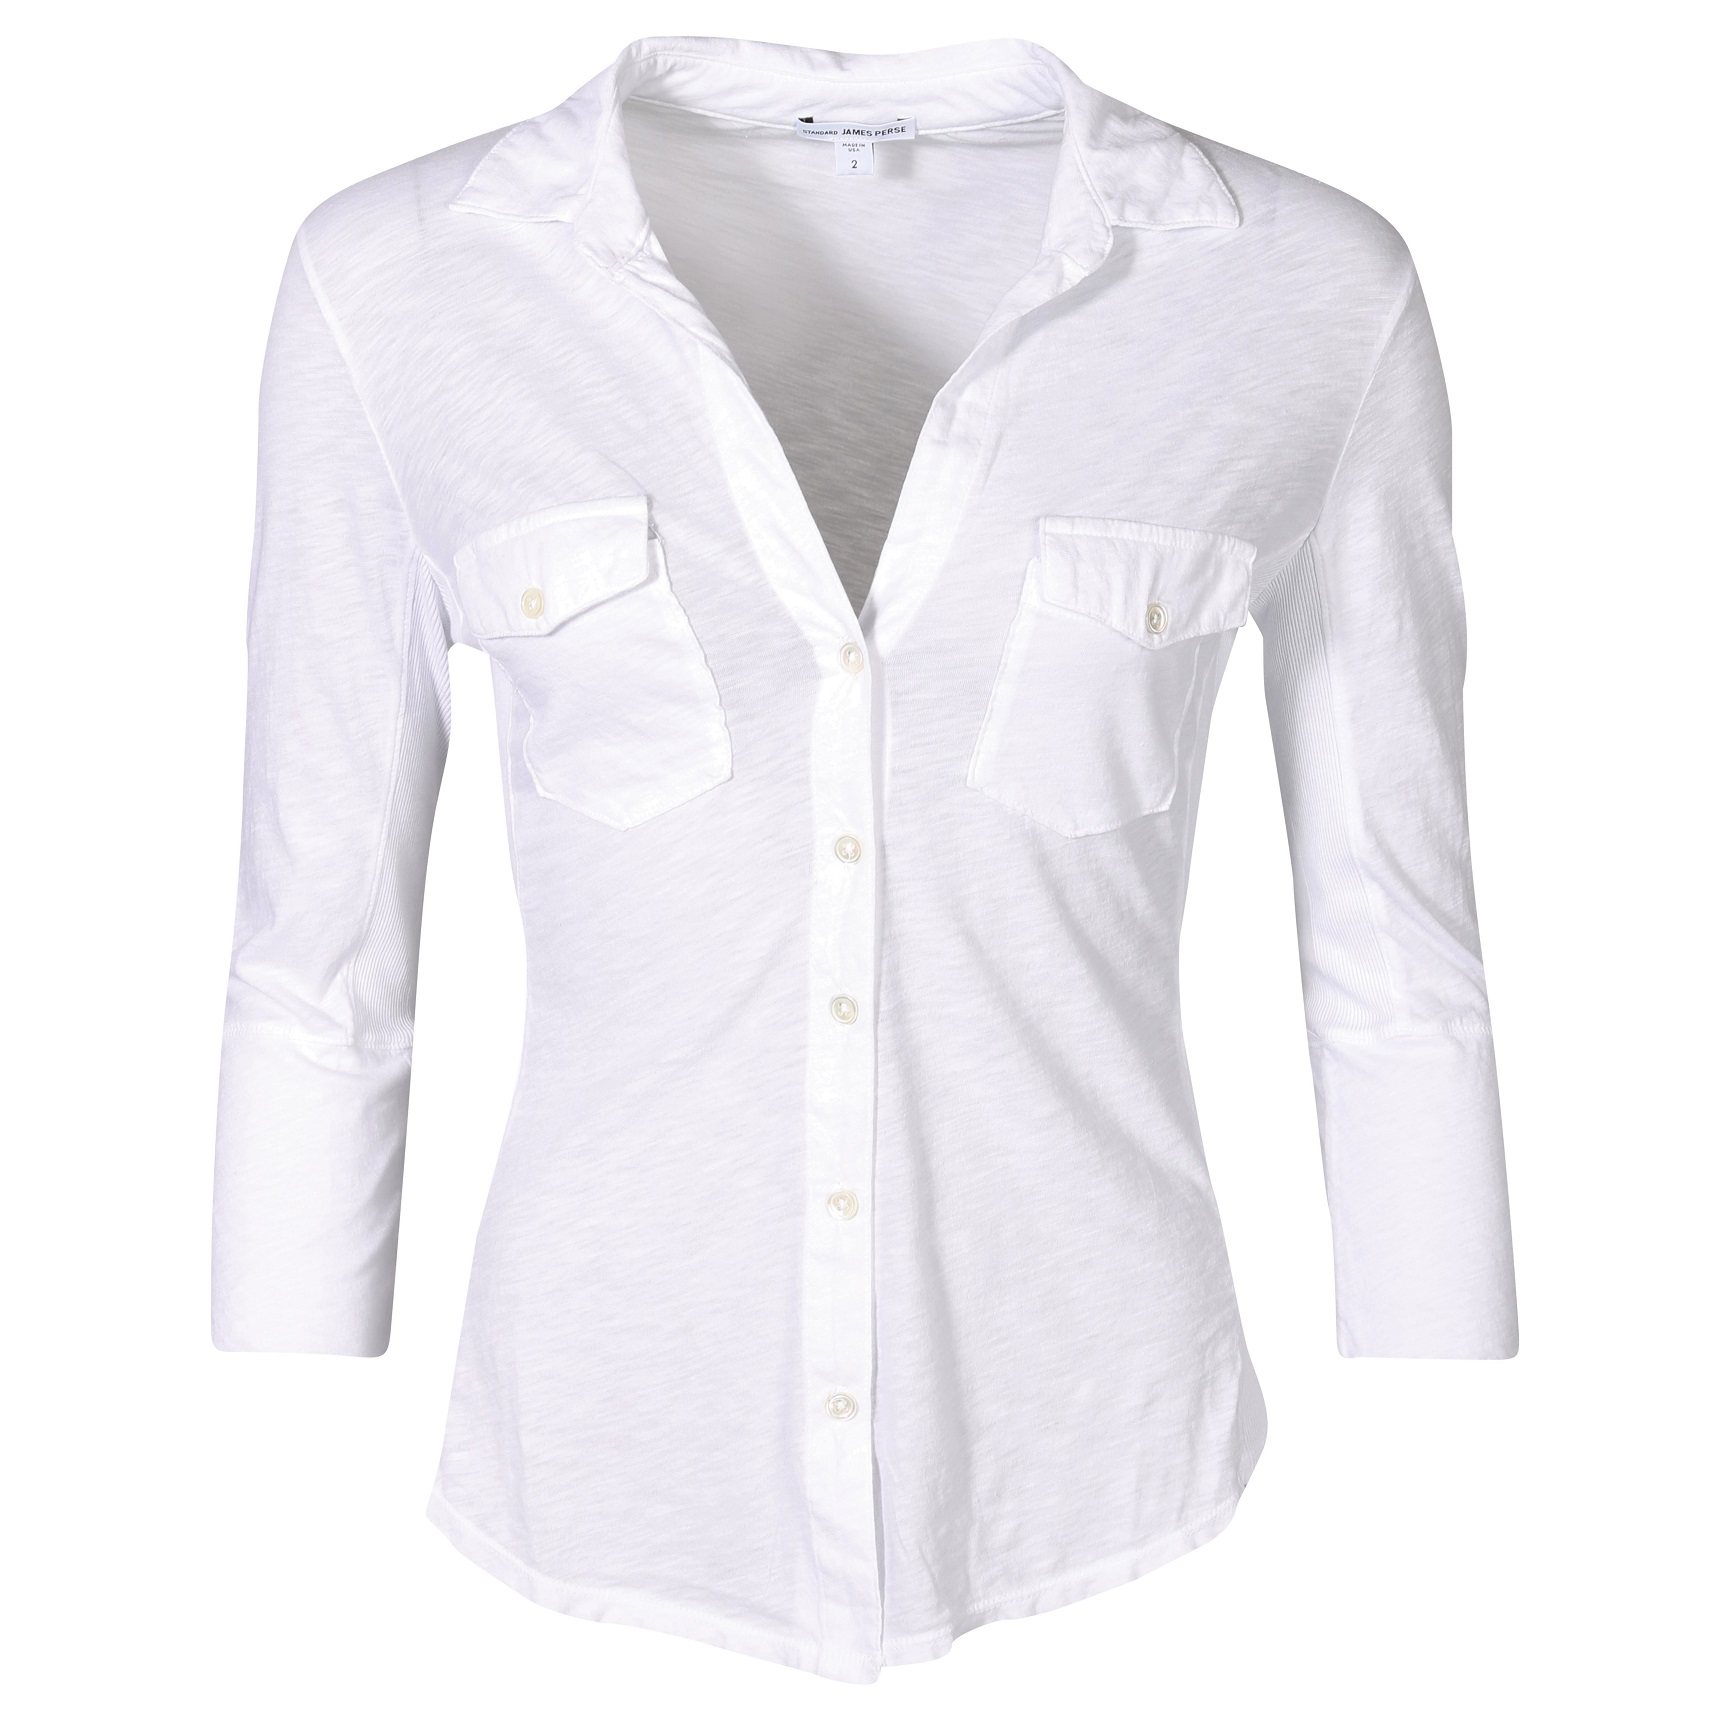 JAMES PERSE Contrast Panel Shirt in White